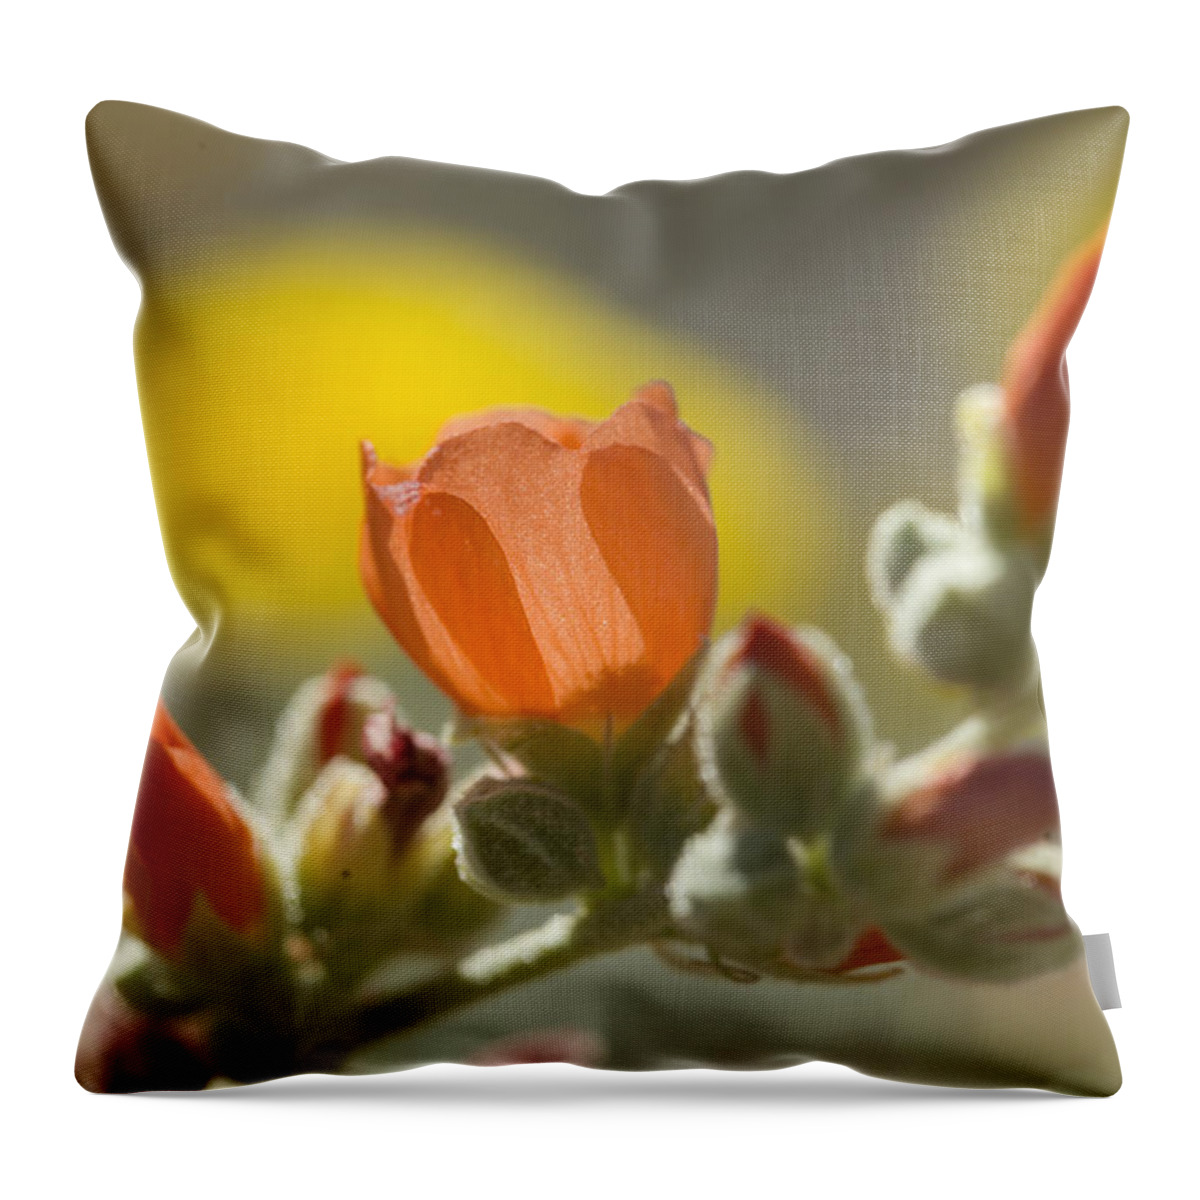 Flowers Throw Pillow featuring the photograph Globe Mallow Glow by Sue Cullumber